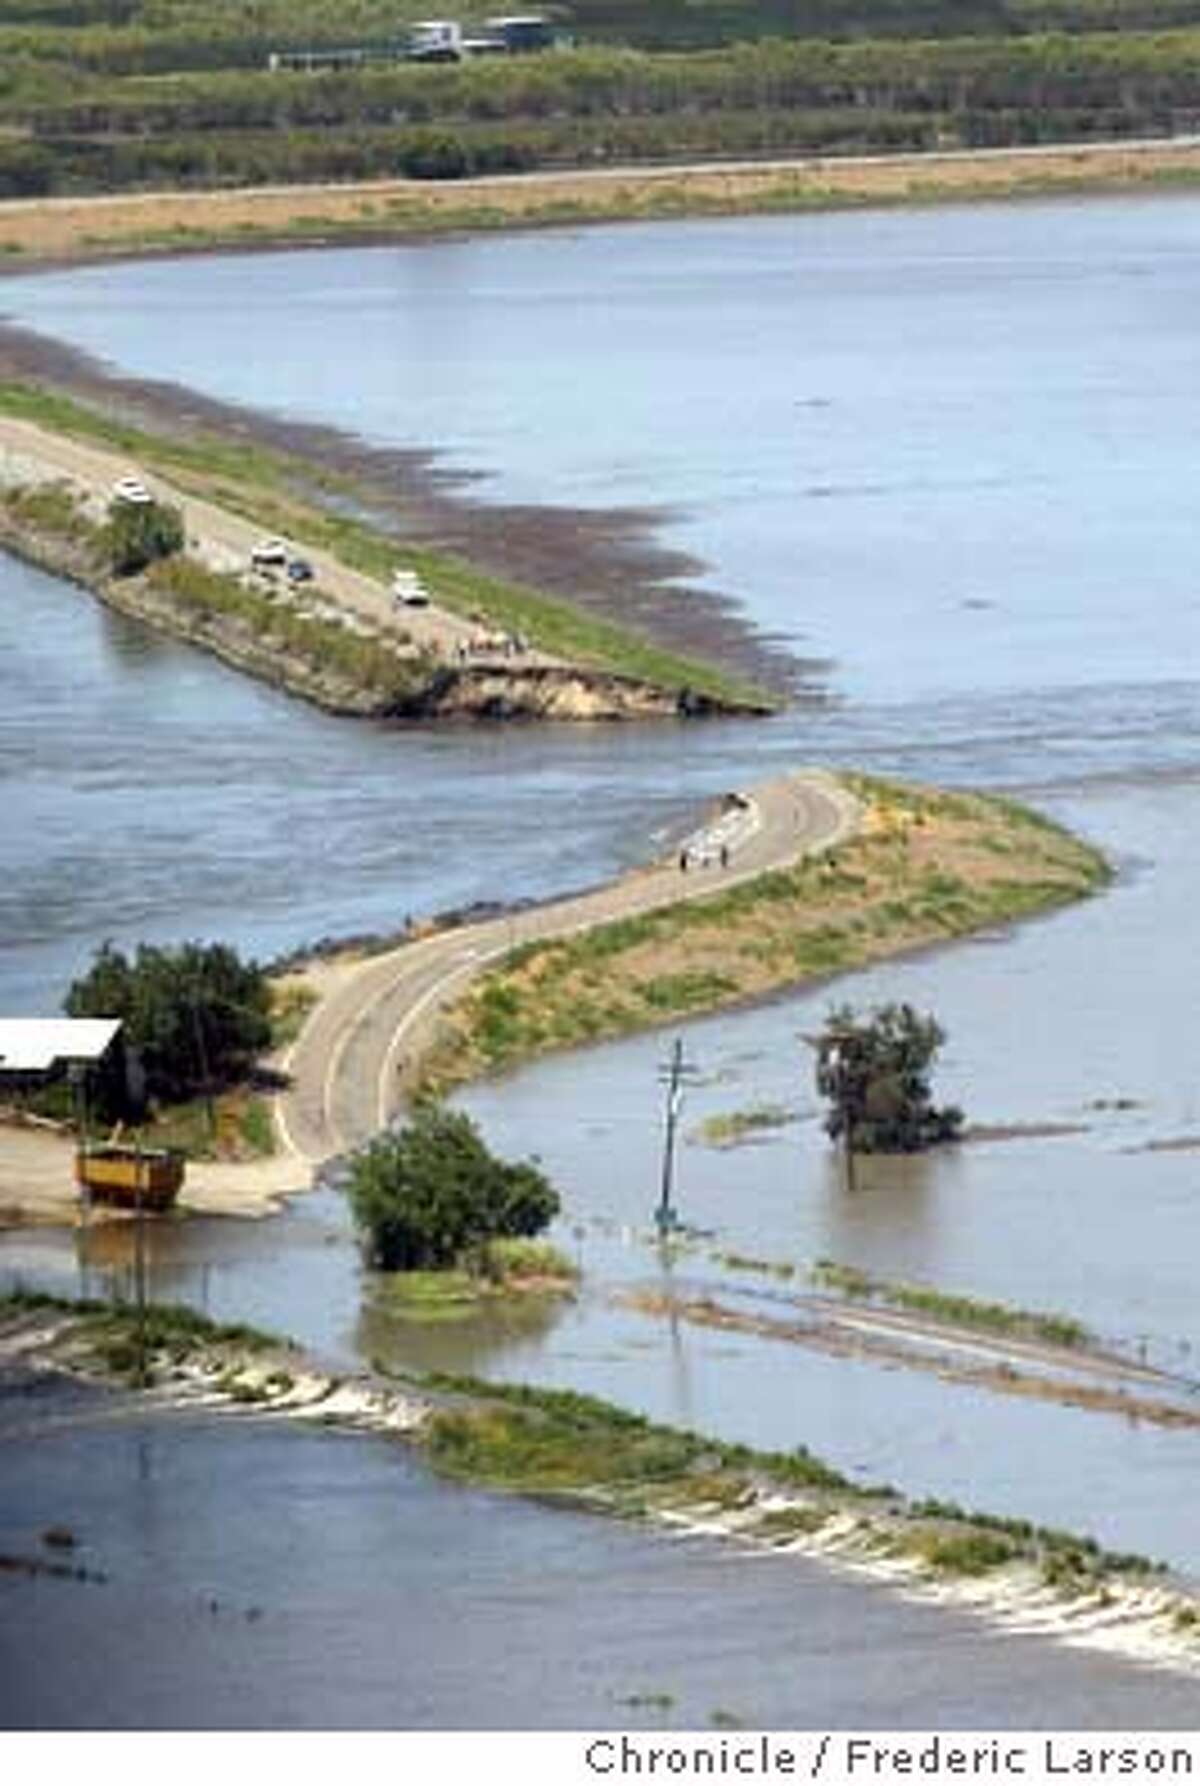 ; A levee break west of Stockton flooded farm fields on Bacon Island Thursday morning near a railroad line and pipelines that carry drinking water to the San Francisco Bay area. Neither the railroad line or water pipelines were immediately affected. Water officials were working to maintain the quality of drinking water flowing to cities as far away as Los Angeles. Coast Guard Petty Officer Wendy MacLean said about 65 feet of the levee gave way about 8:45 a.m. near the intersection of State Route 4 and West Bacon Island Road, north of Woodward Ferry. 6/3/04 San Francisco Chronicle Frederic Larson